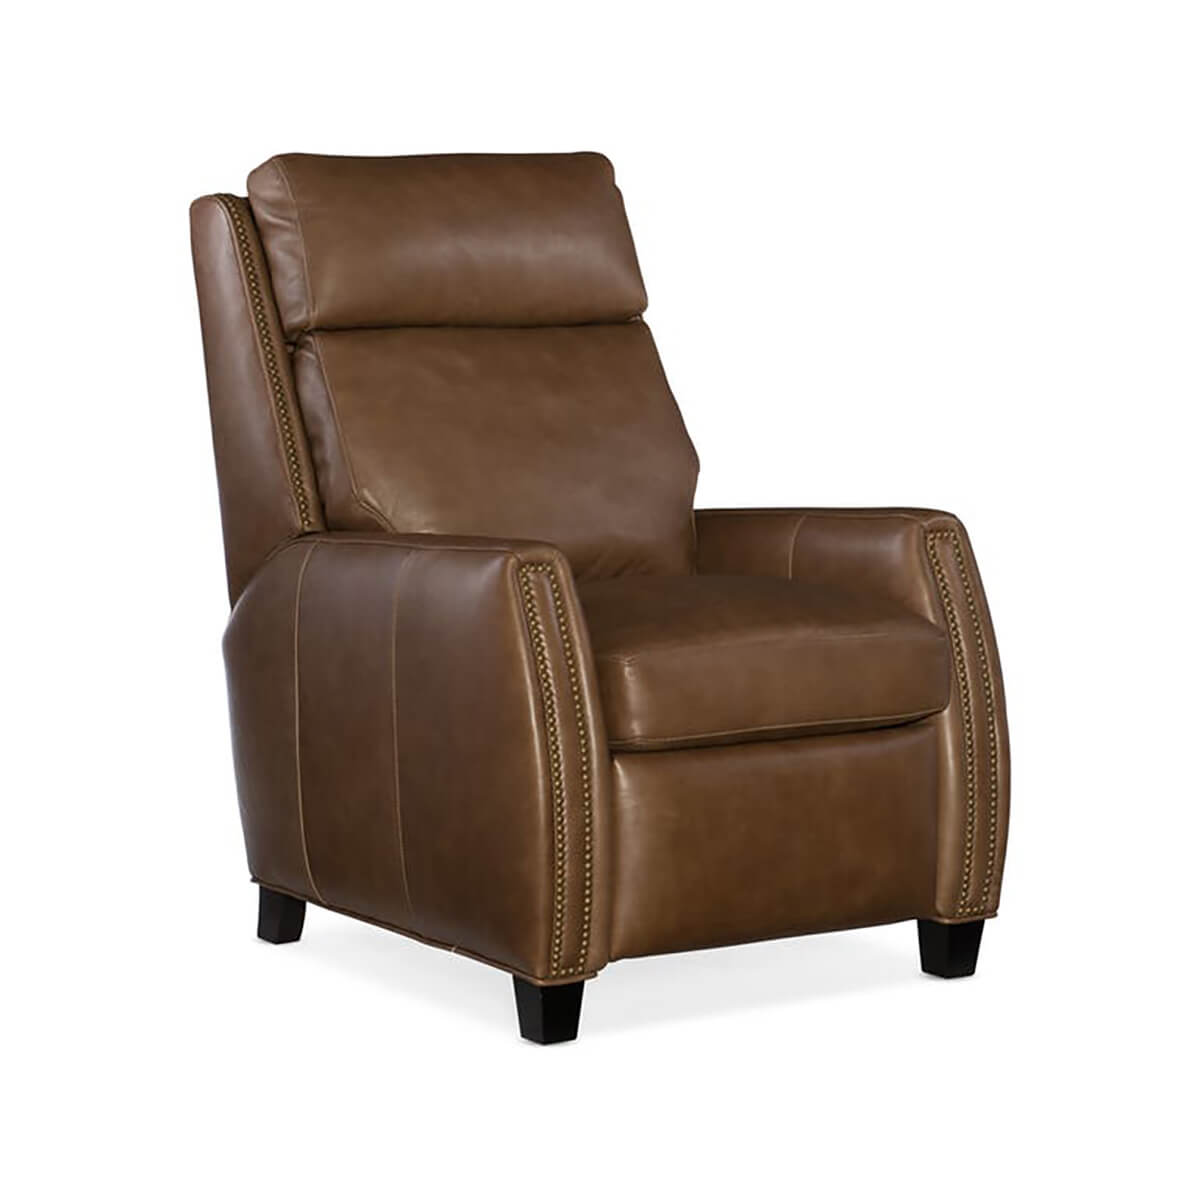 Read more about the article Cheyenne Recliner Chair